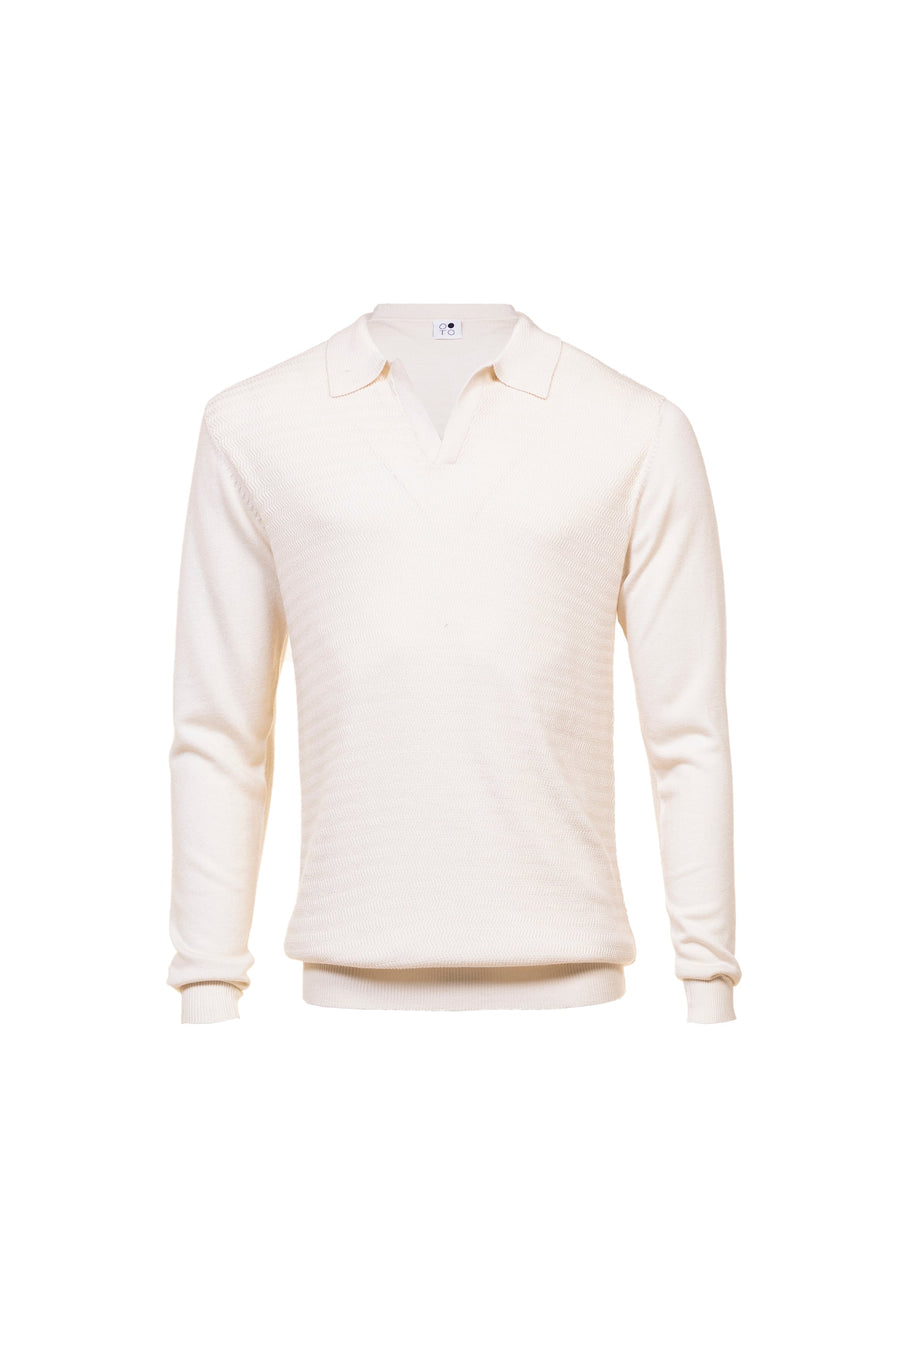 Irwing Men's Ribbed Polo